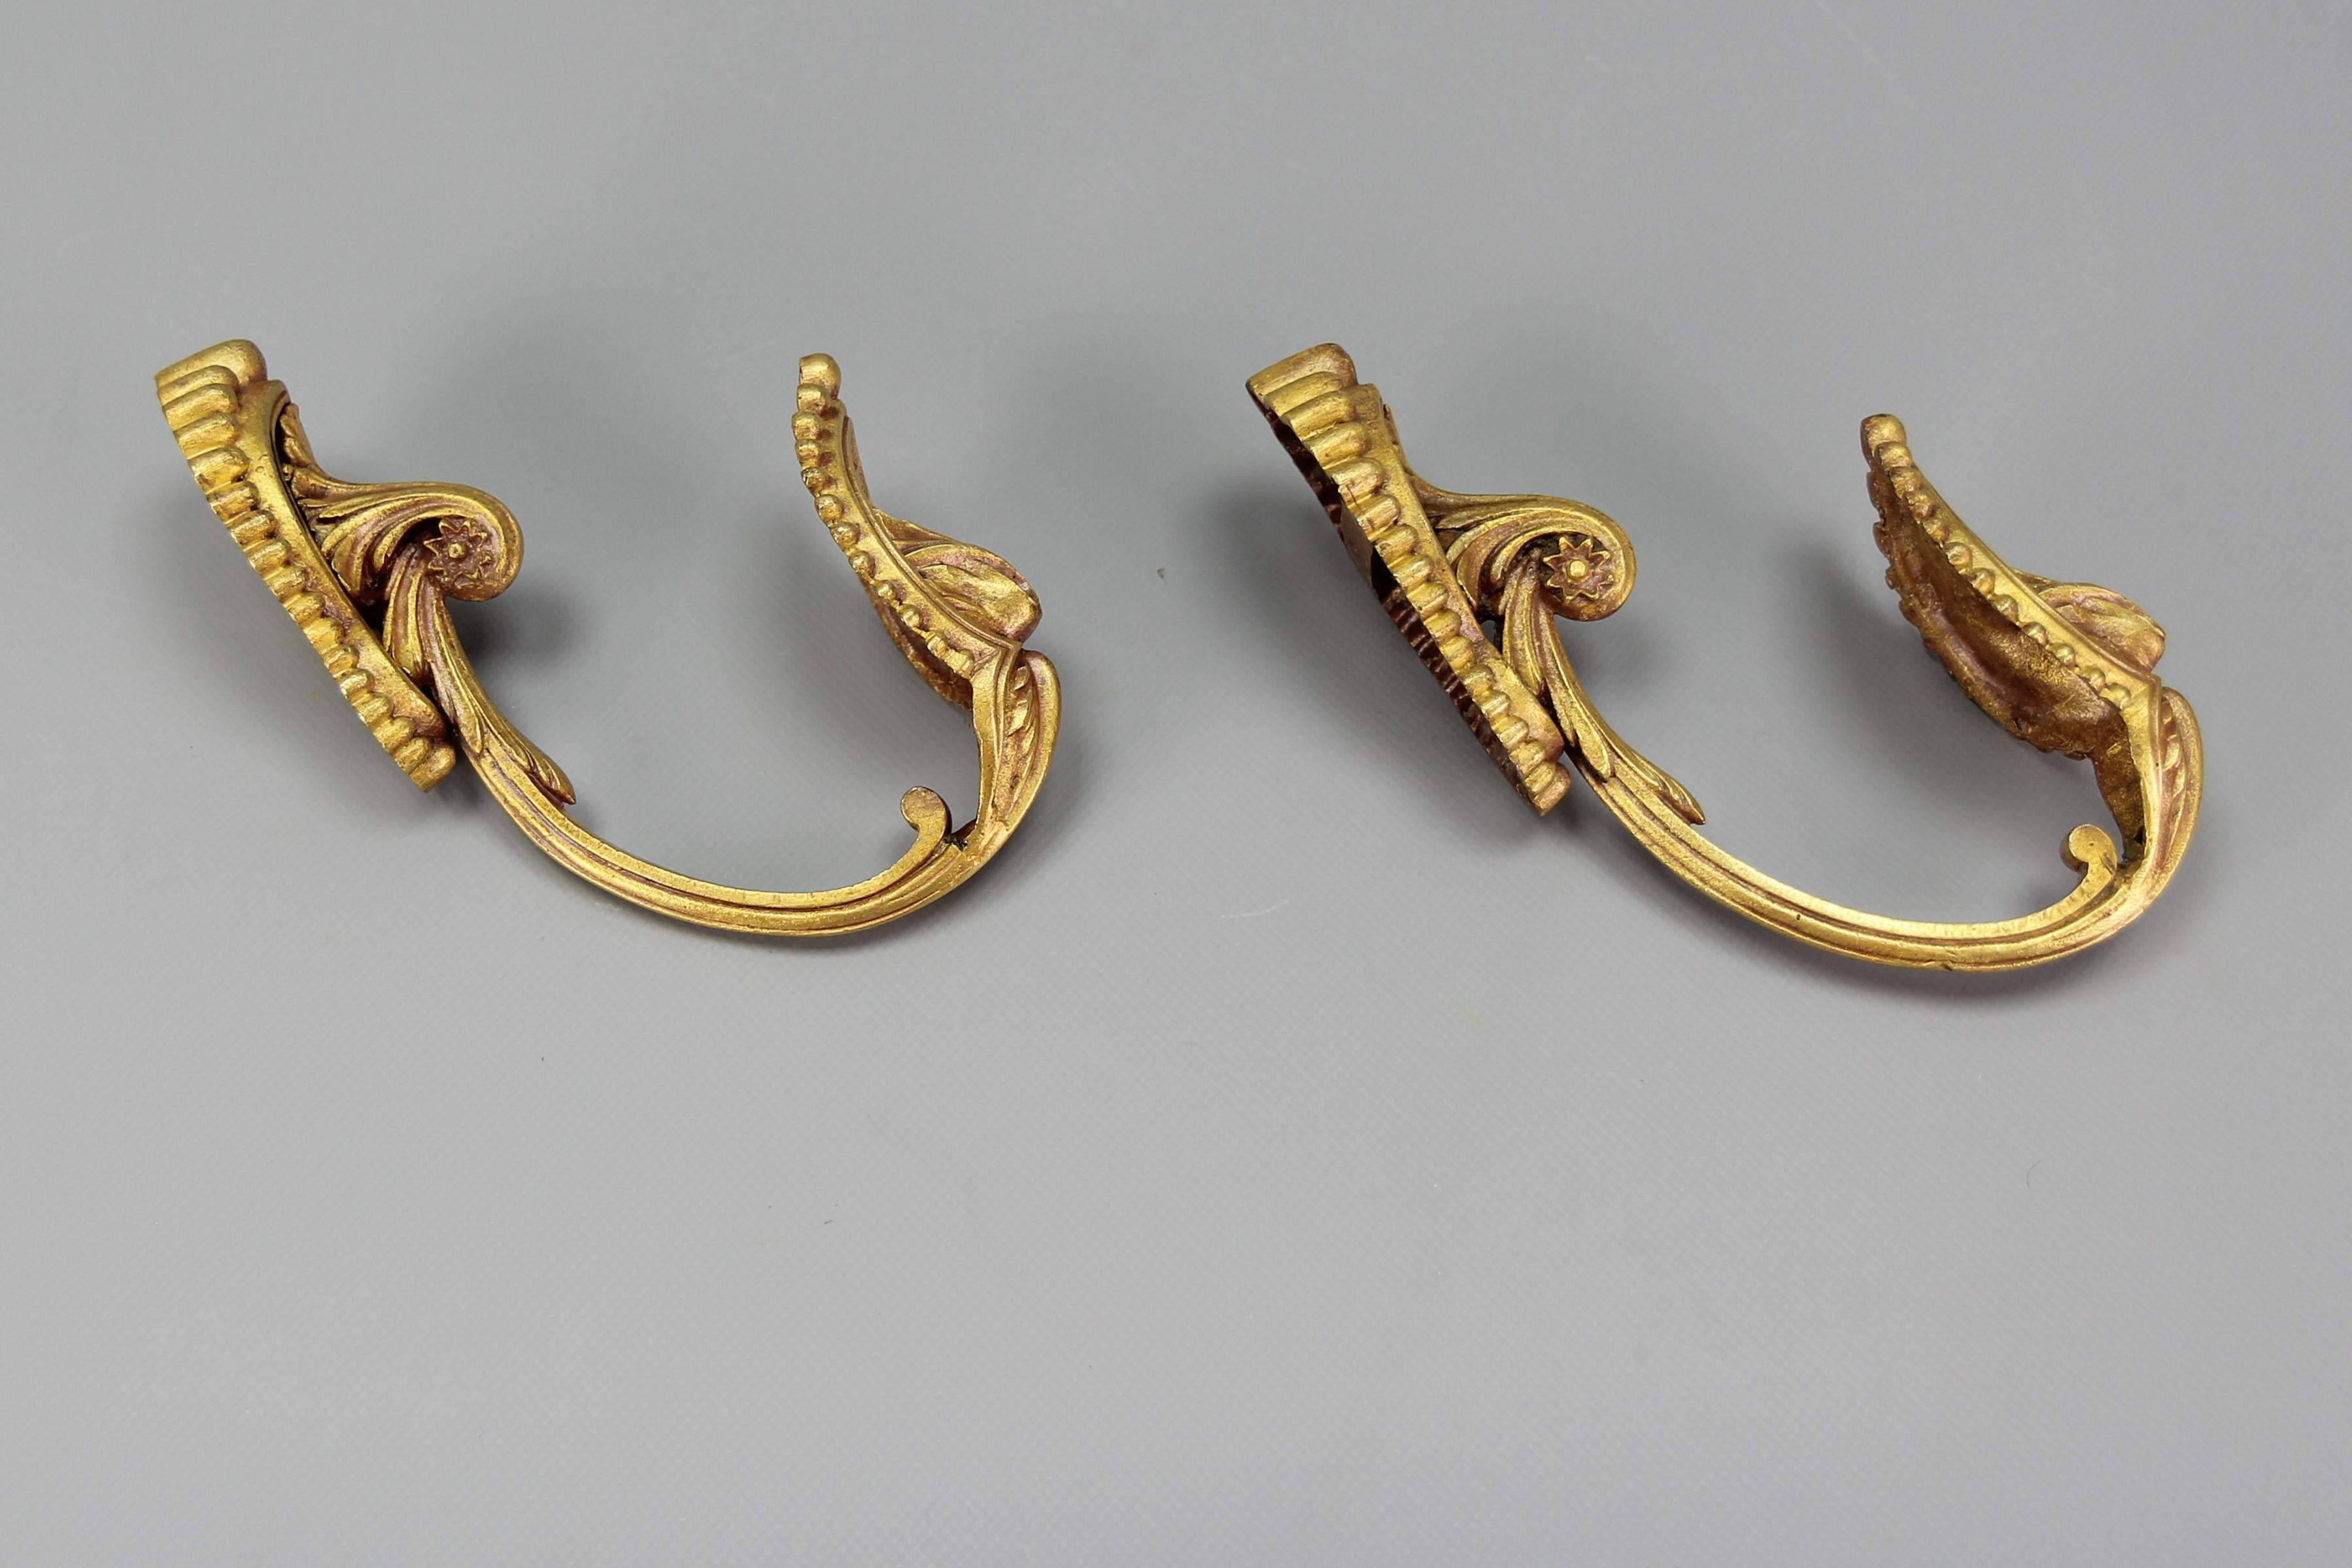 Pair of French Bronze Curtain Tiebacks or Curtain Holders, Early 20th Century For Sale 15